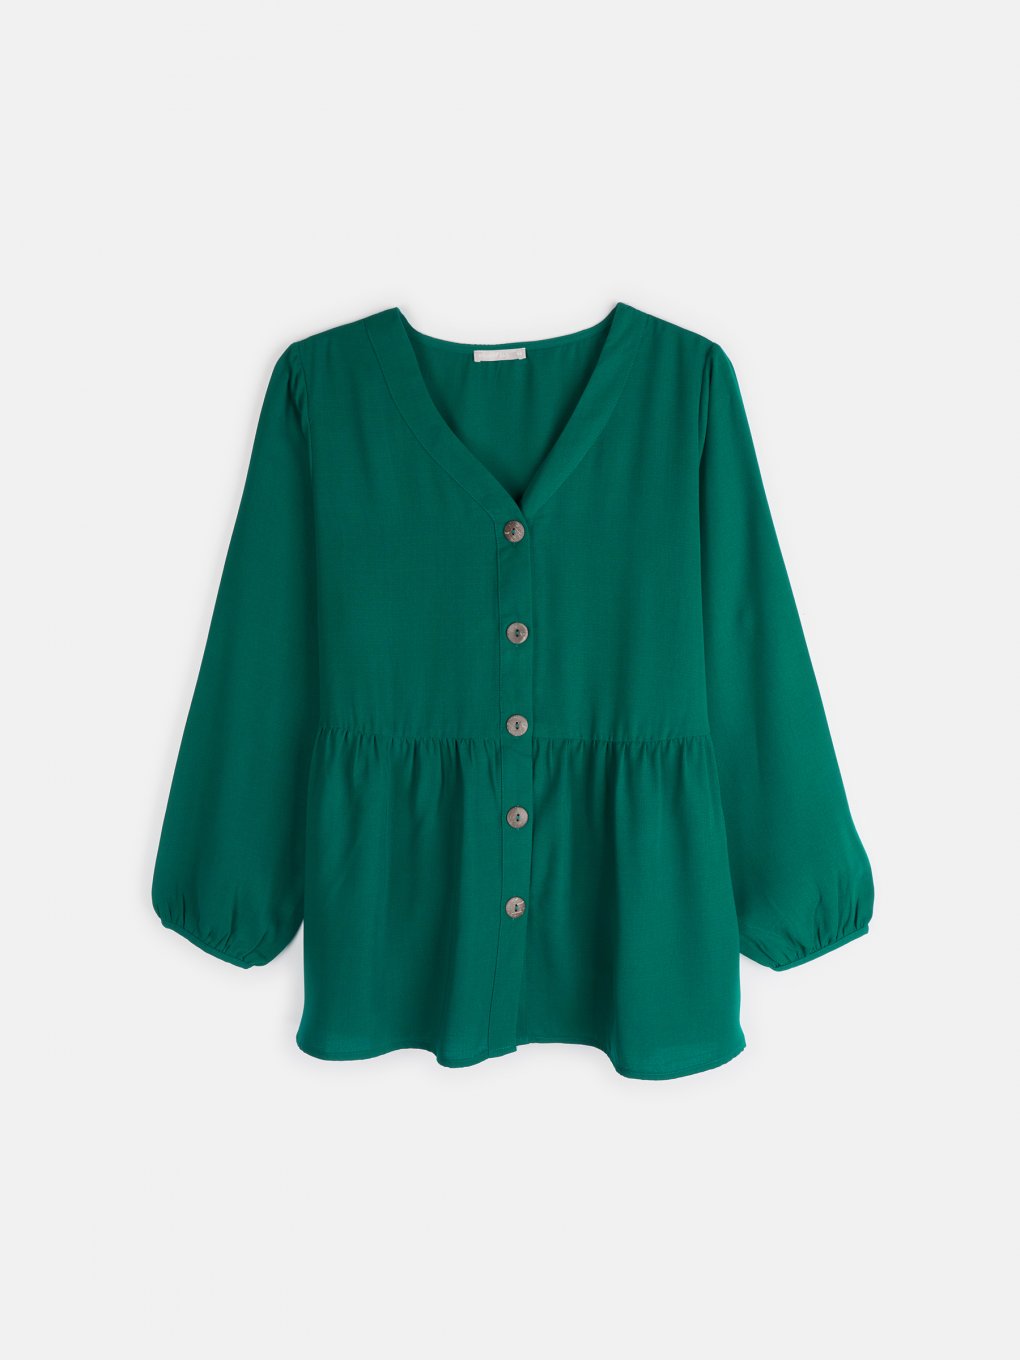 Plus size button down blouse with ruffle